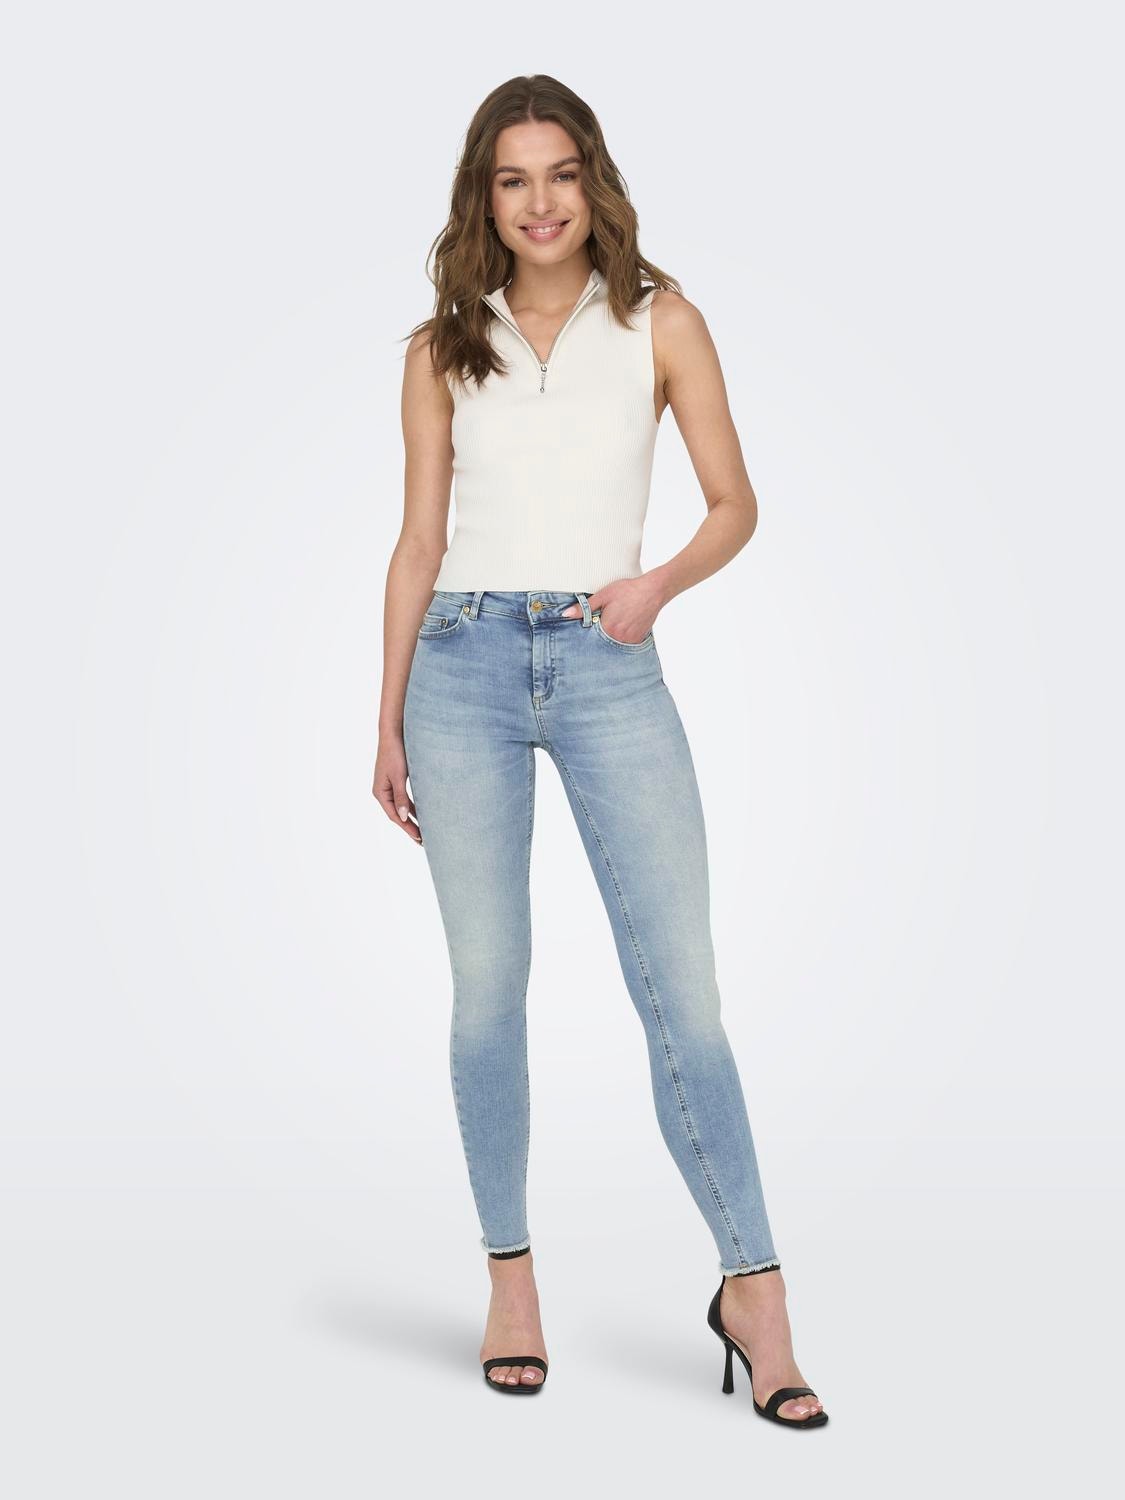 ONLY Jeans Skinny Fit Taille moyenne -Light Blue Denim - 15164319